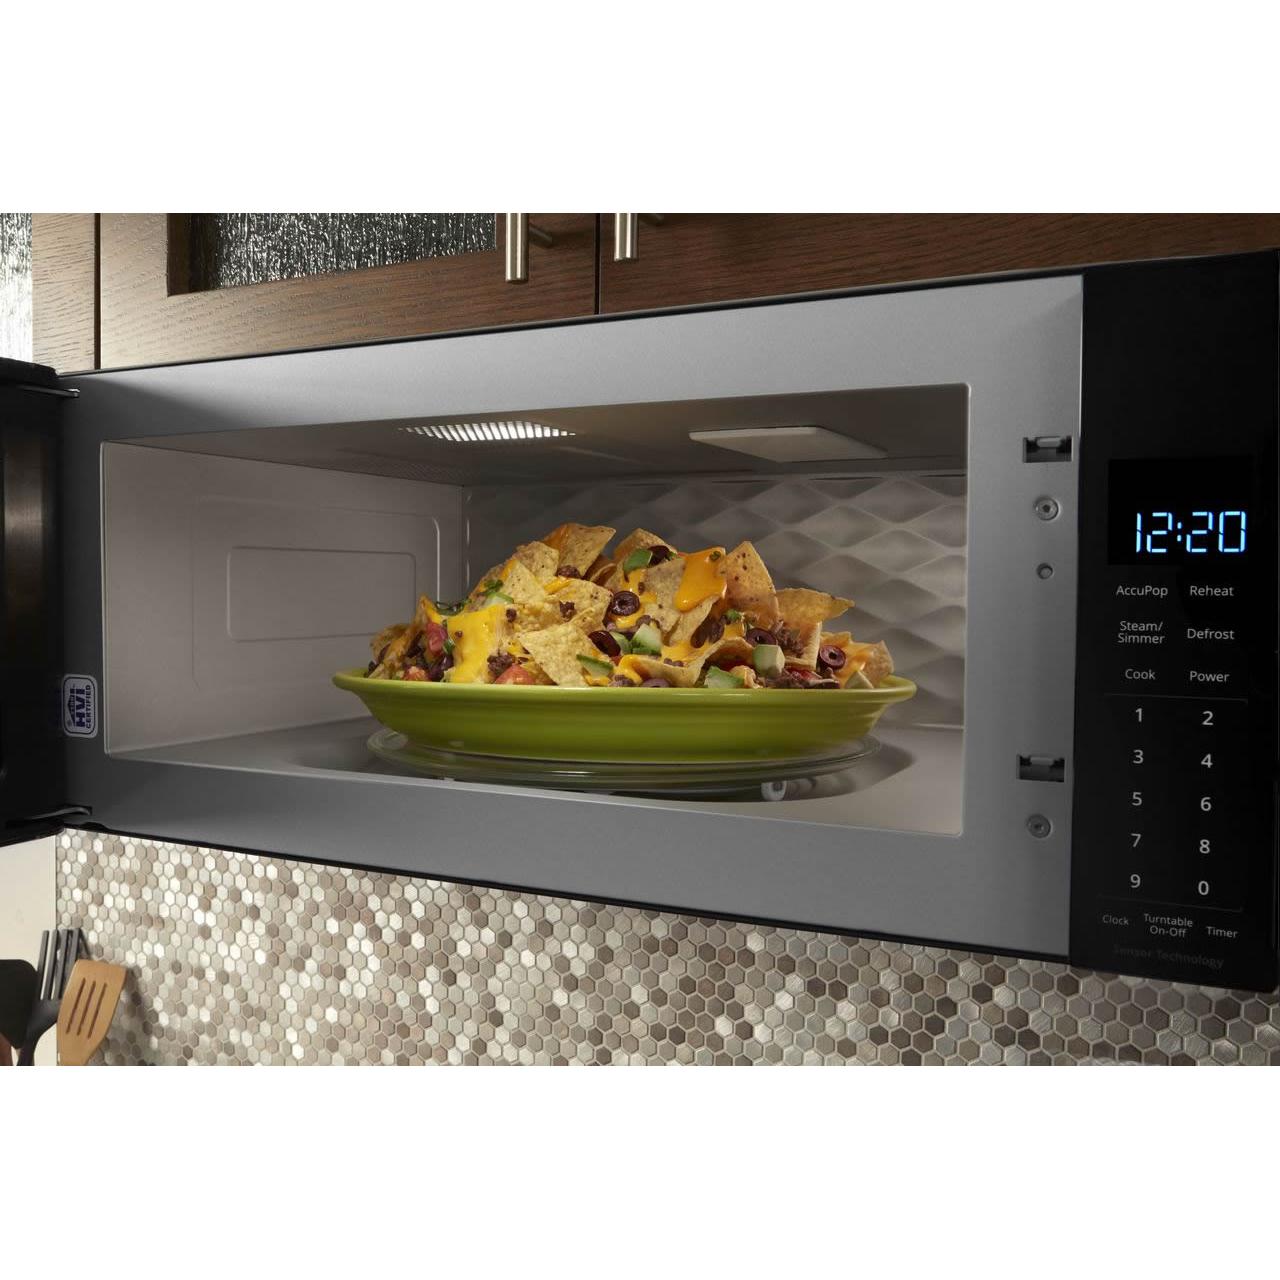 Whirlpool 30-inch, 1.1 cu. ft. Over The Range Microwave Oven WML75011HZ